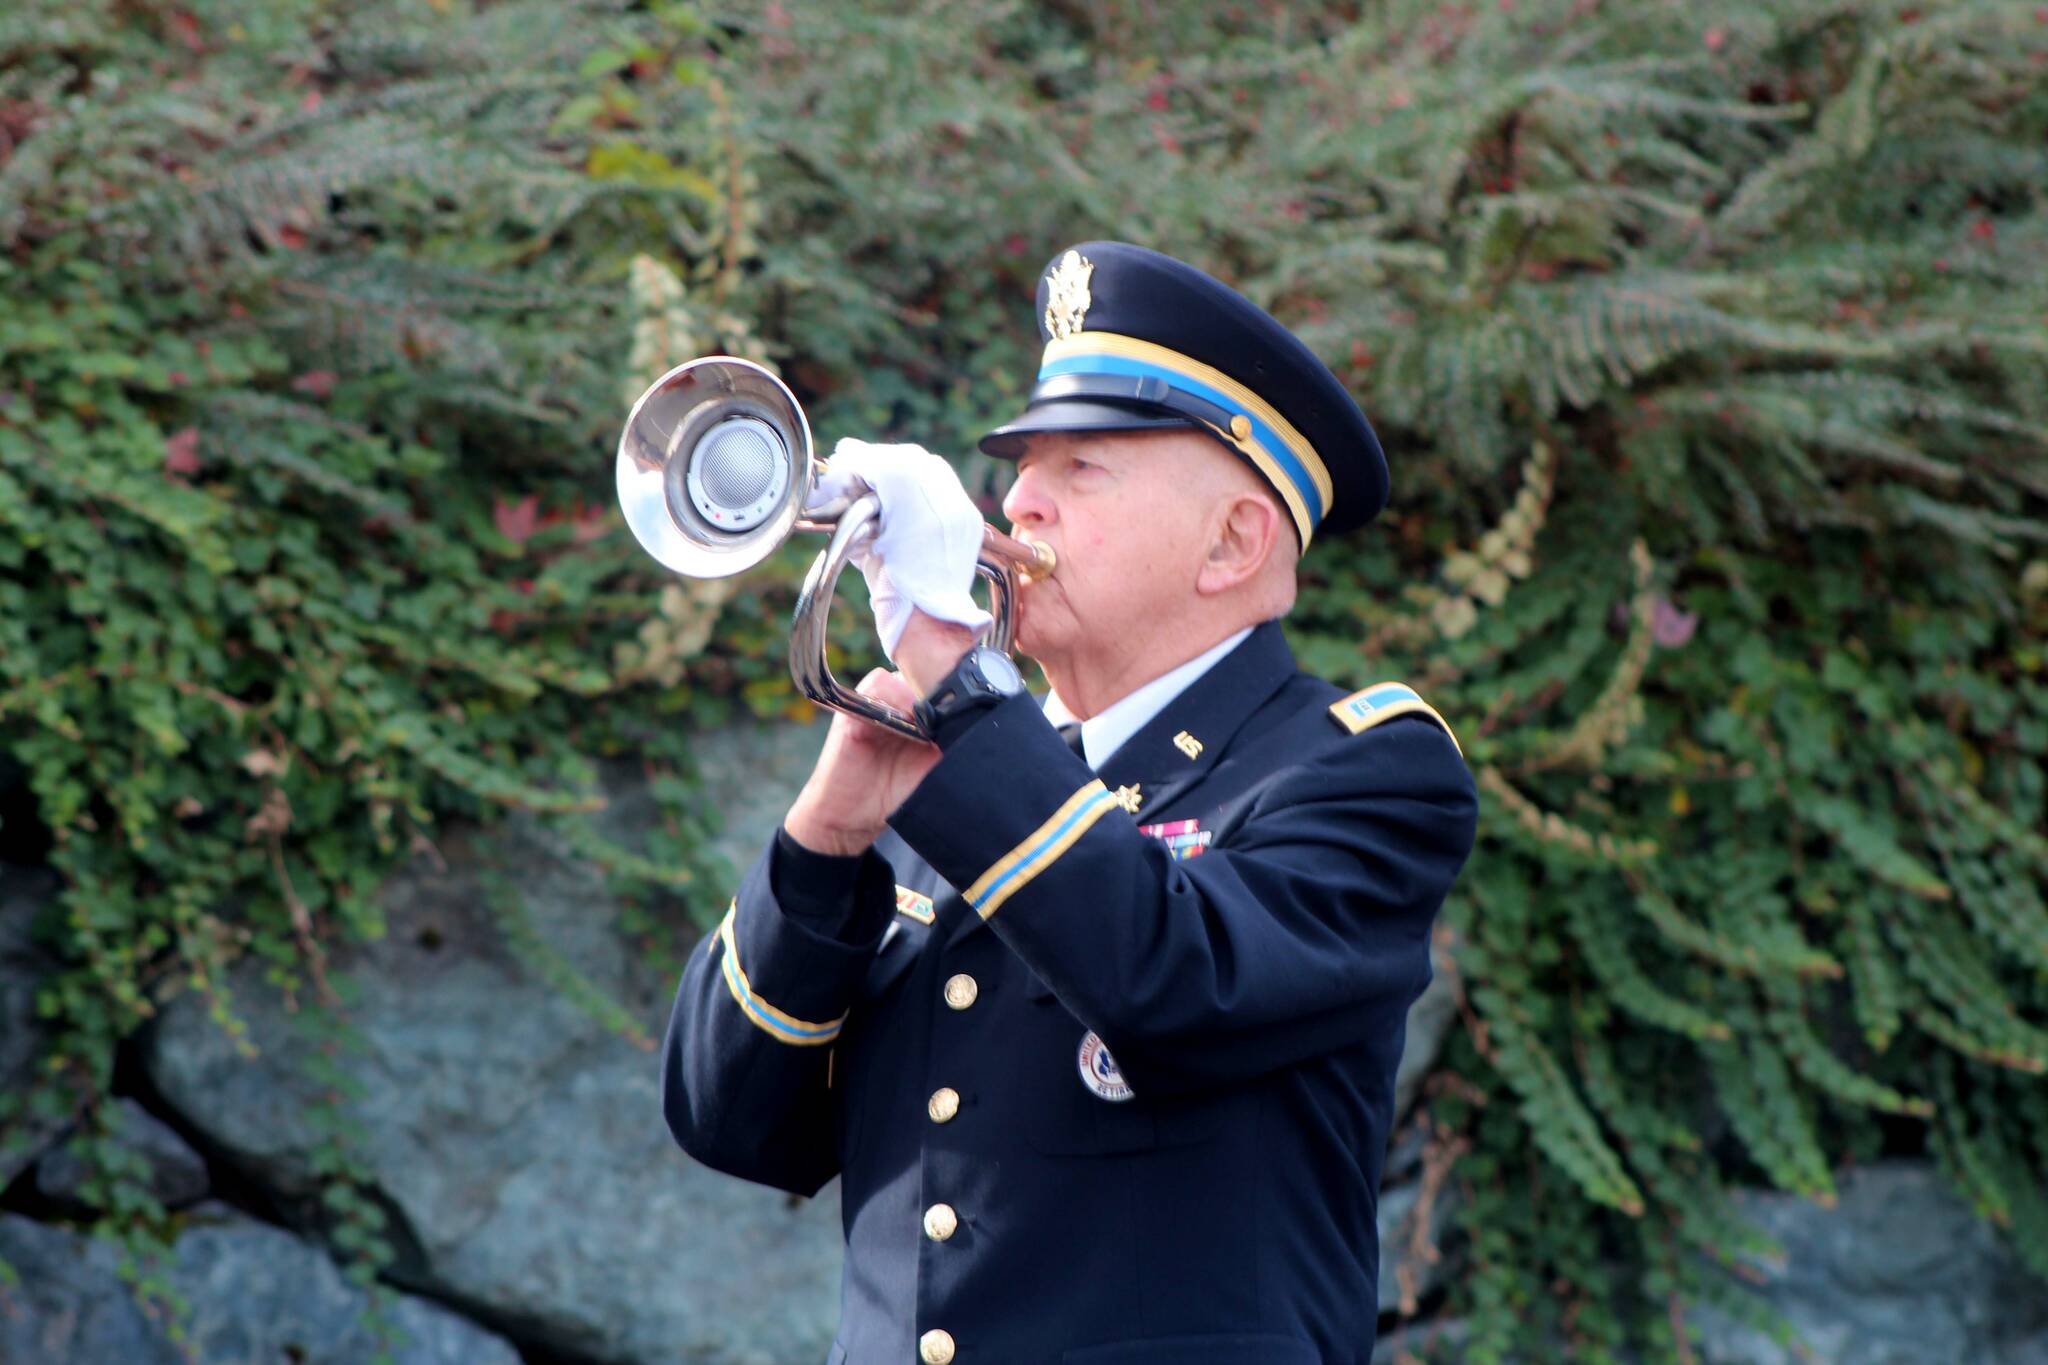 Art Farash, an Army Veteran and American Legion Post 79 member, plays TAPS during a flag ceremony.